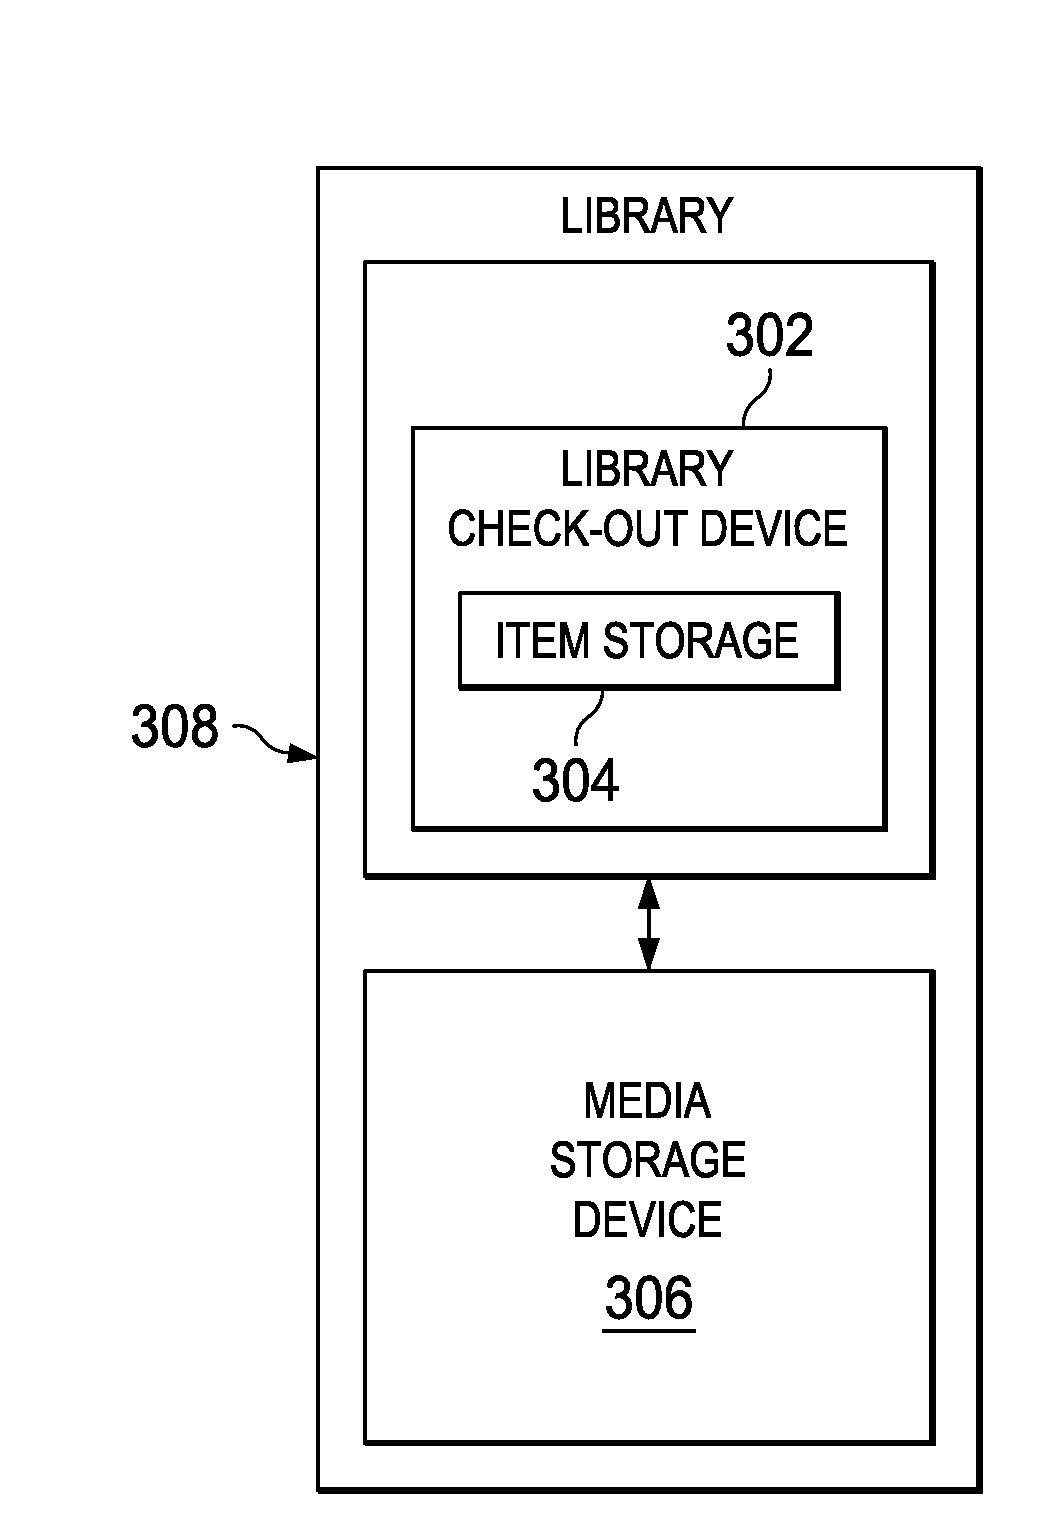 Electronic library book